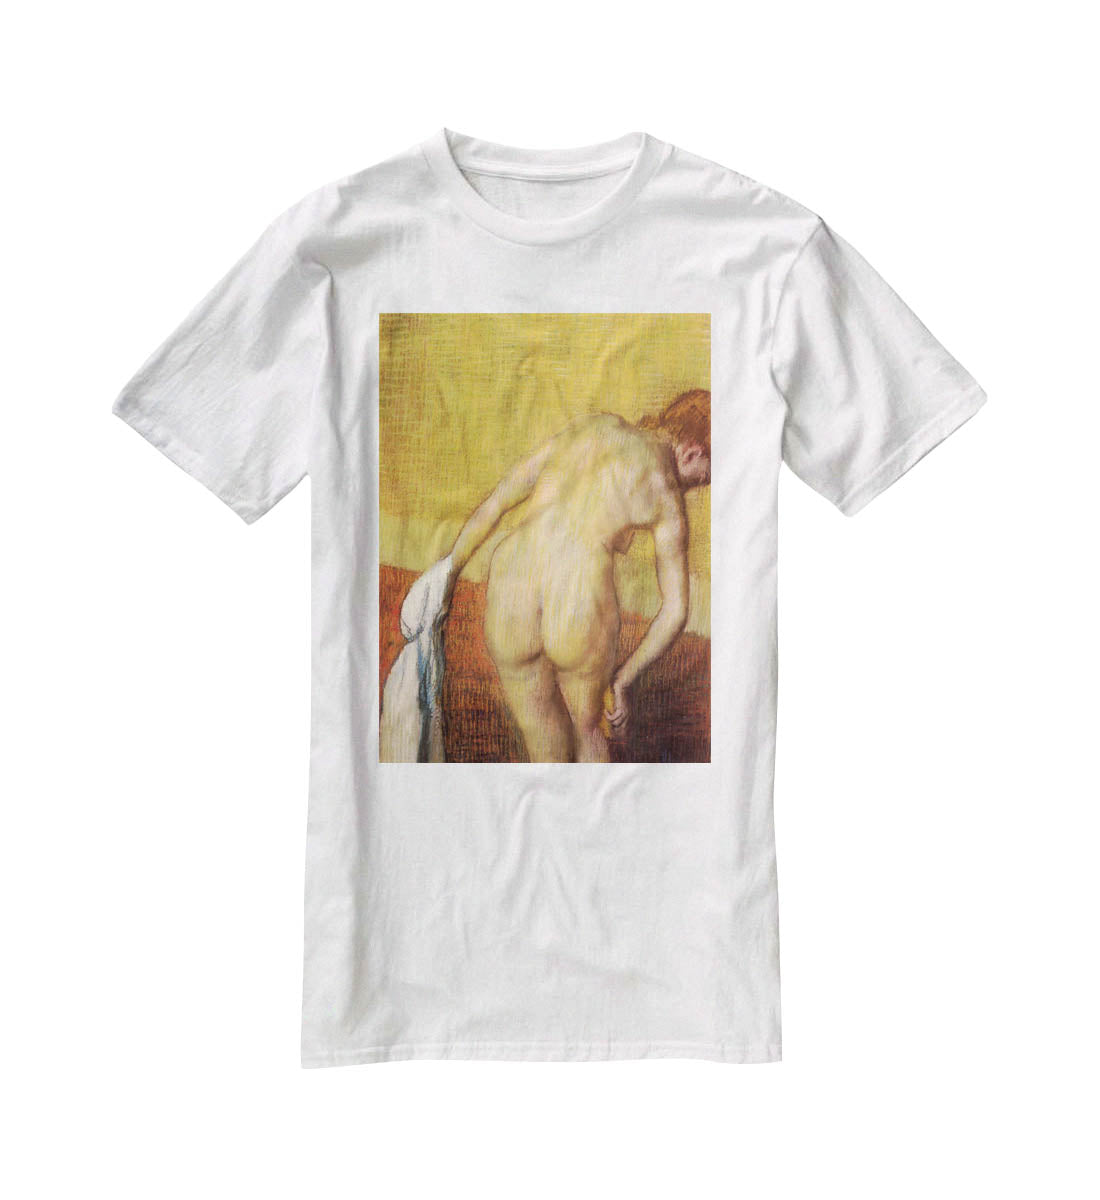 Woman Drying with towel and sponge by Degas T-Shirt - Canvas Art Rocks - 5